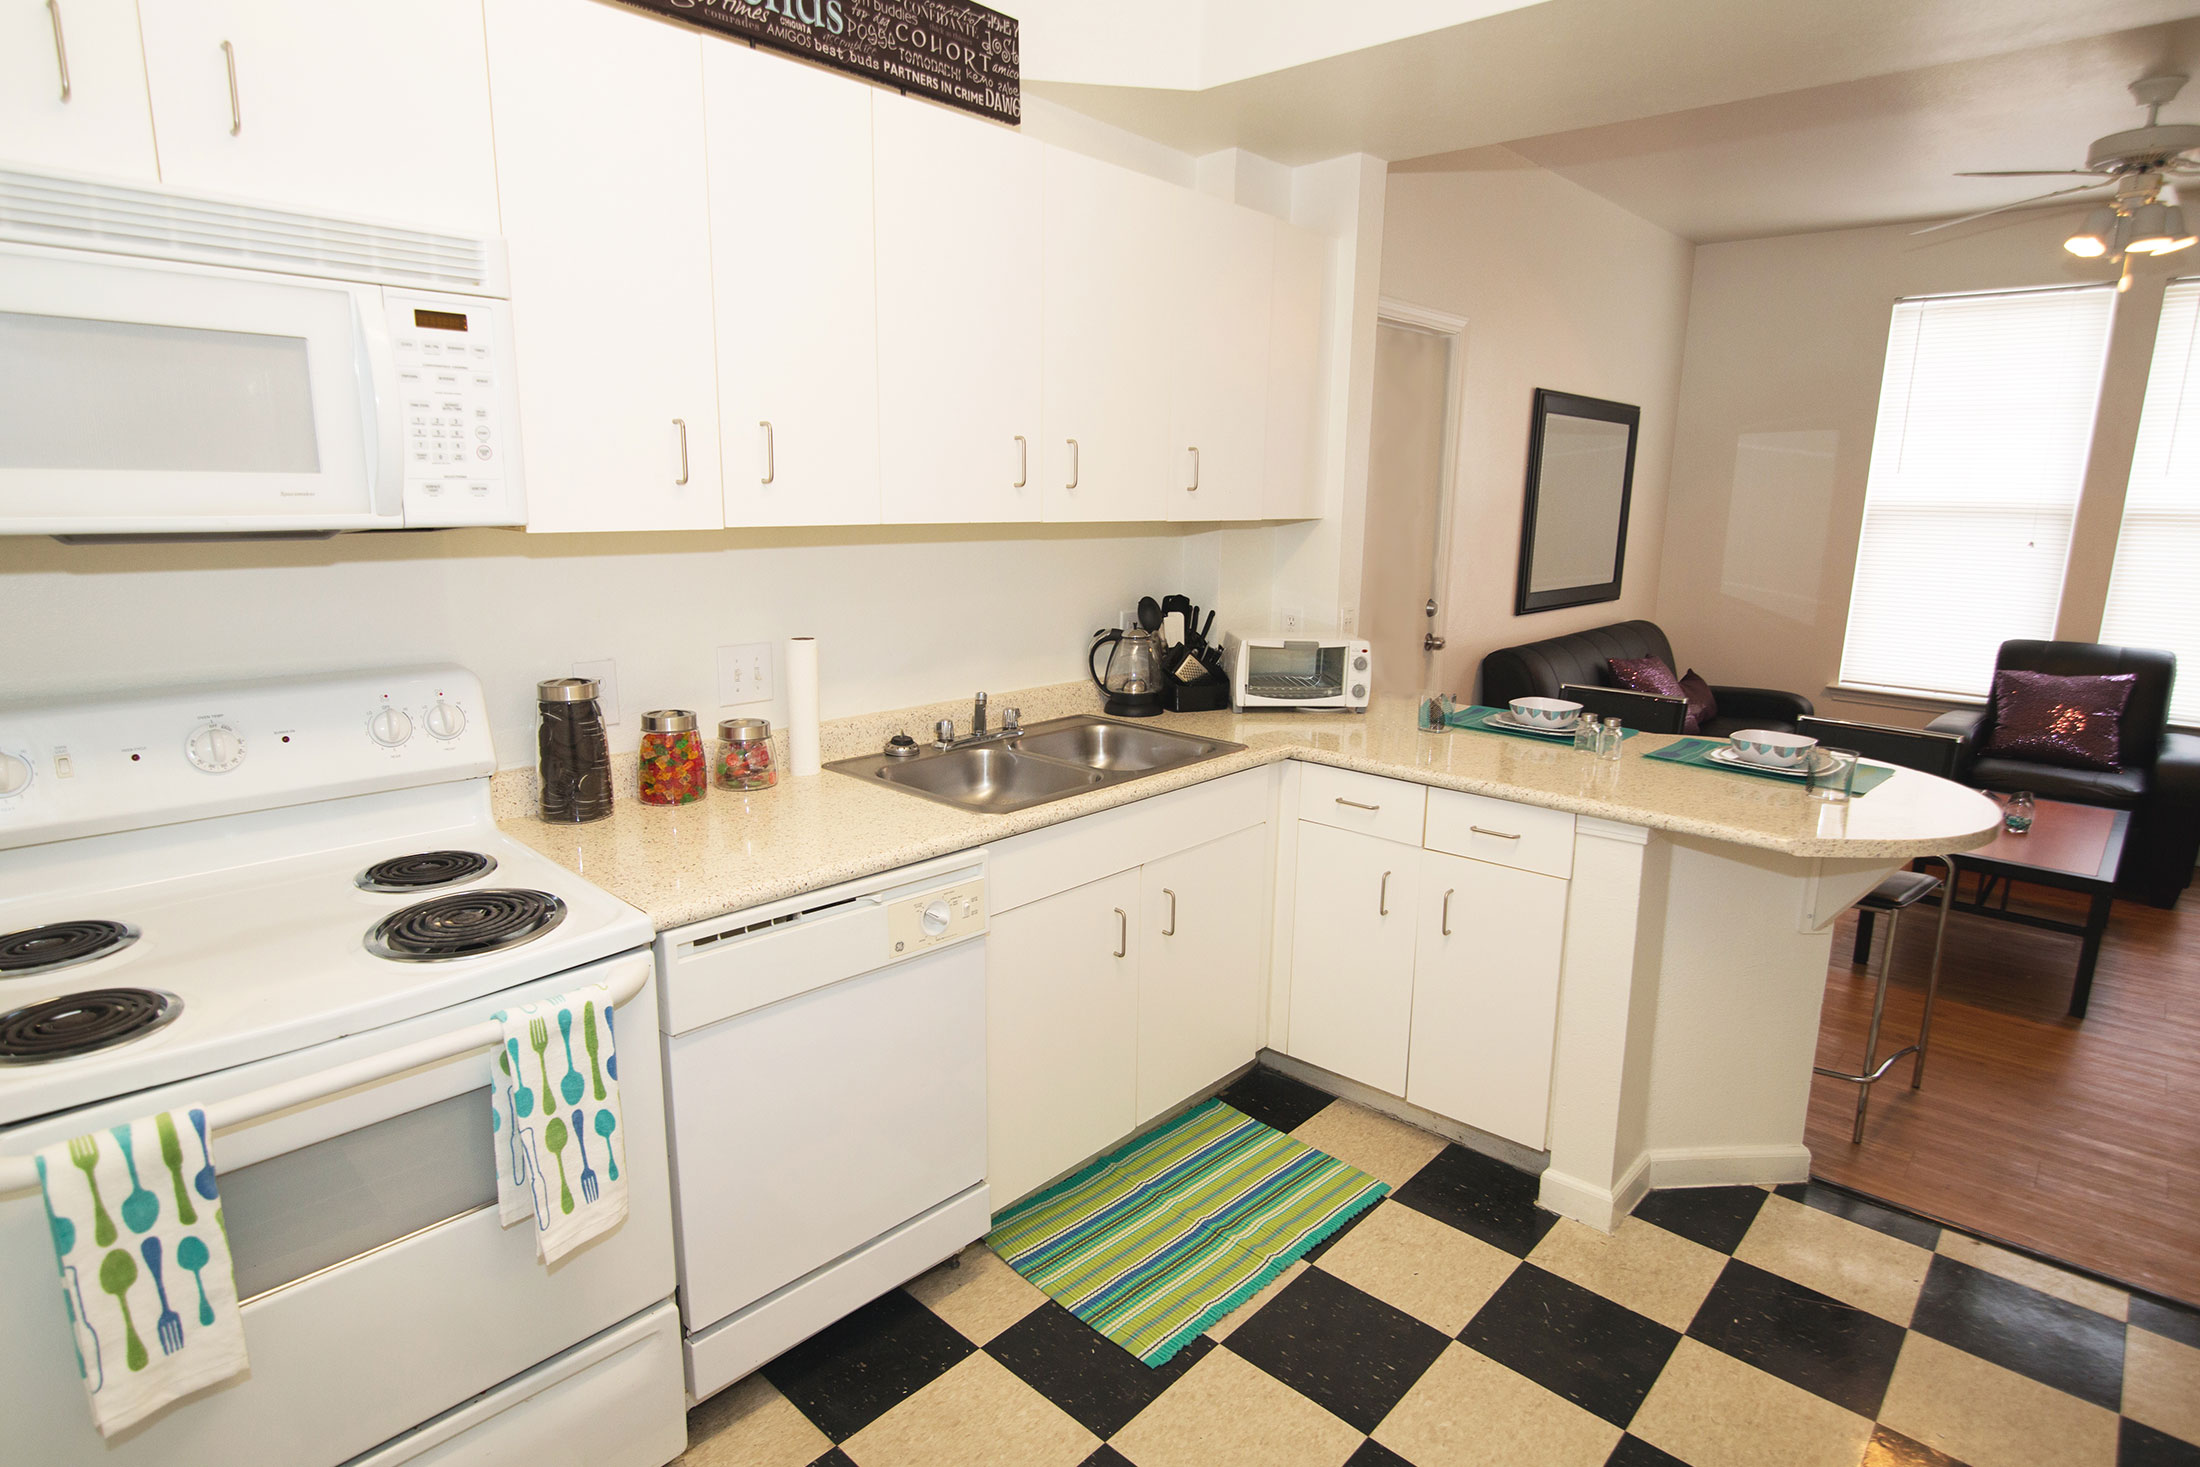 Kitchen with checkerboard floor and white cabinets and appliances including a range, dishwasher and microwave with stainless steel double basin sink, open to the Living Area.